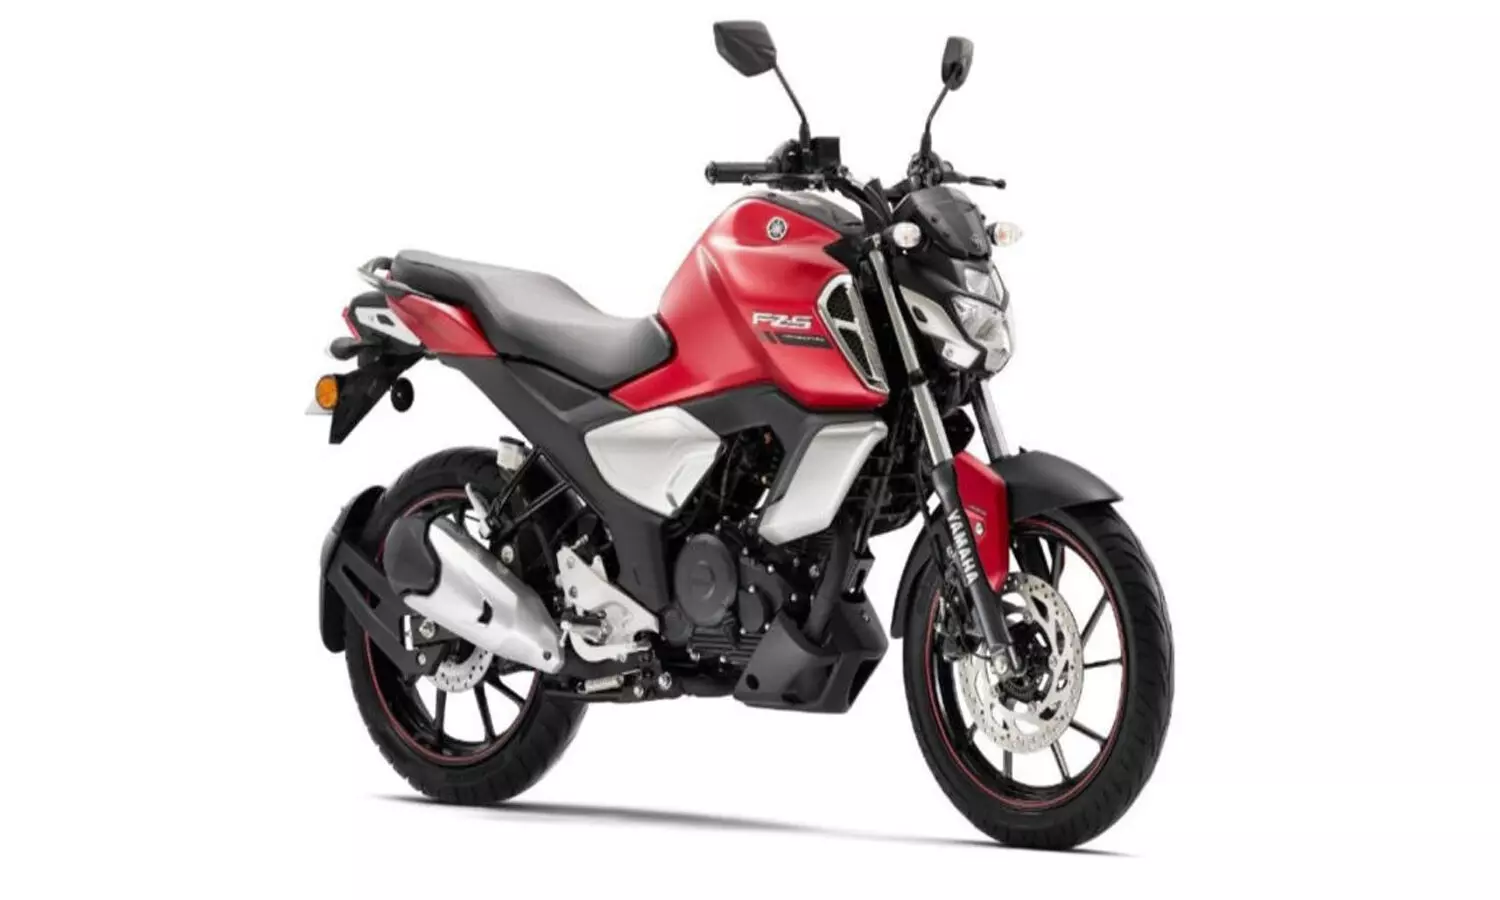 Yamaha Launched Its FZS-FI With New Features